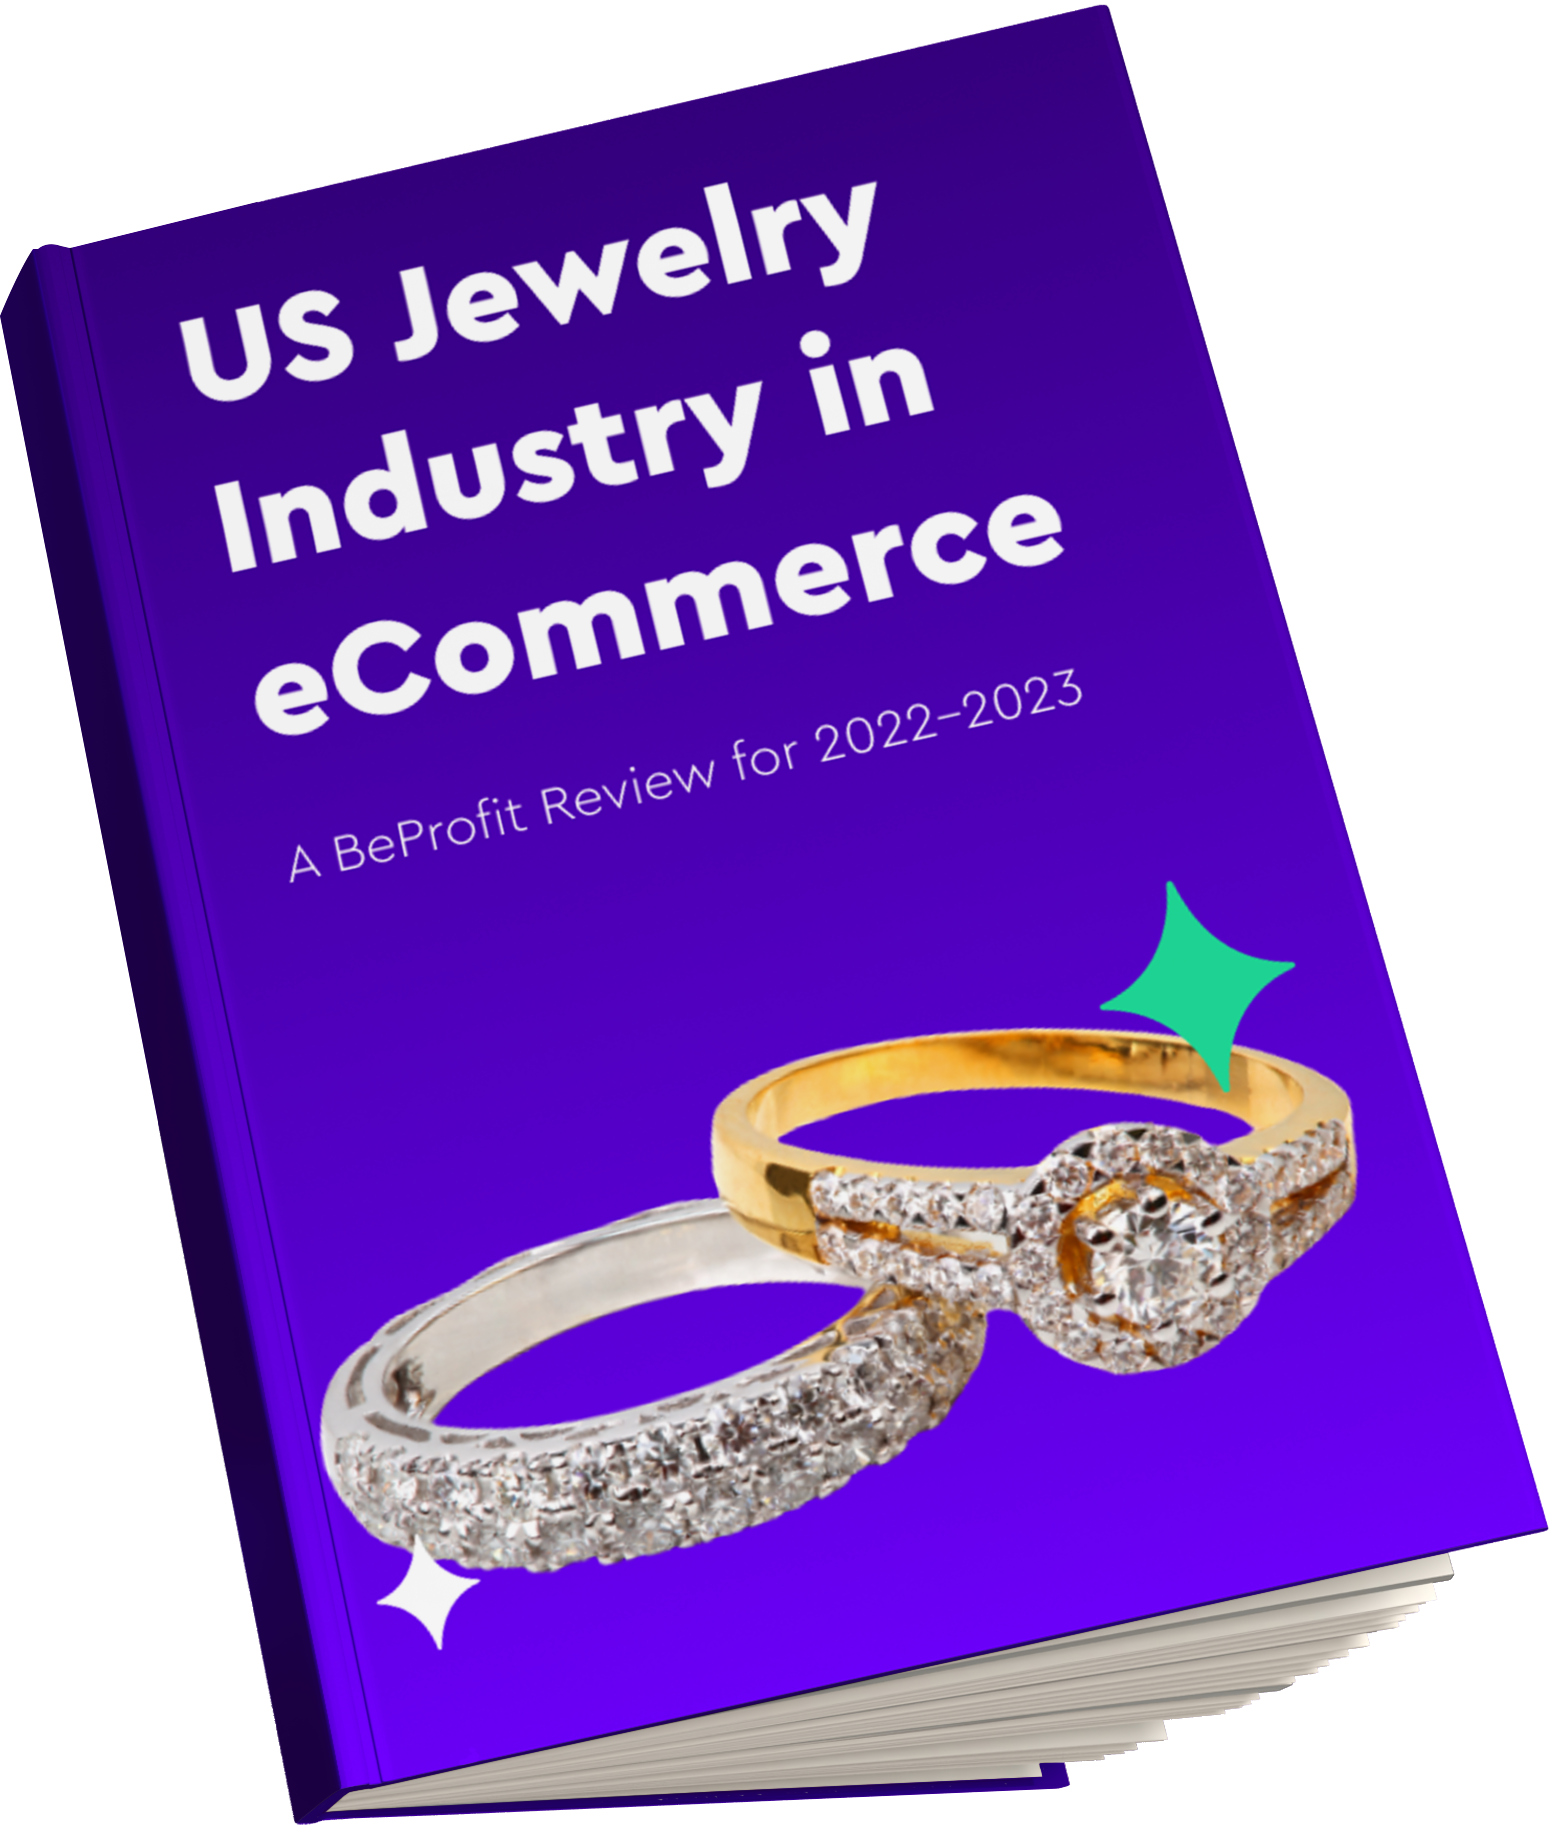 US Jewelry Industry in eCommerce